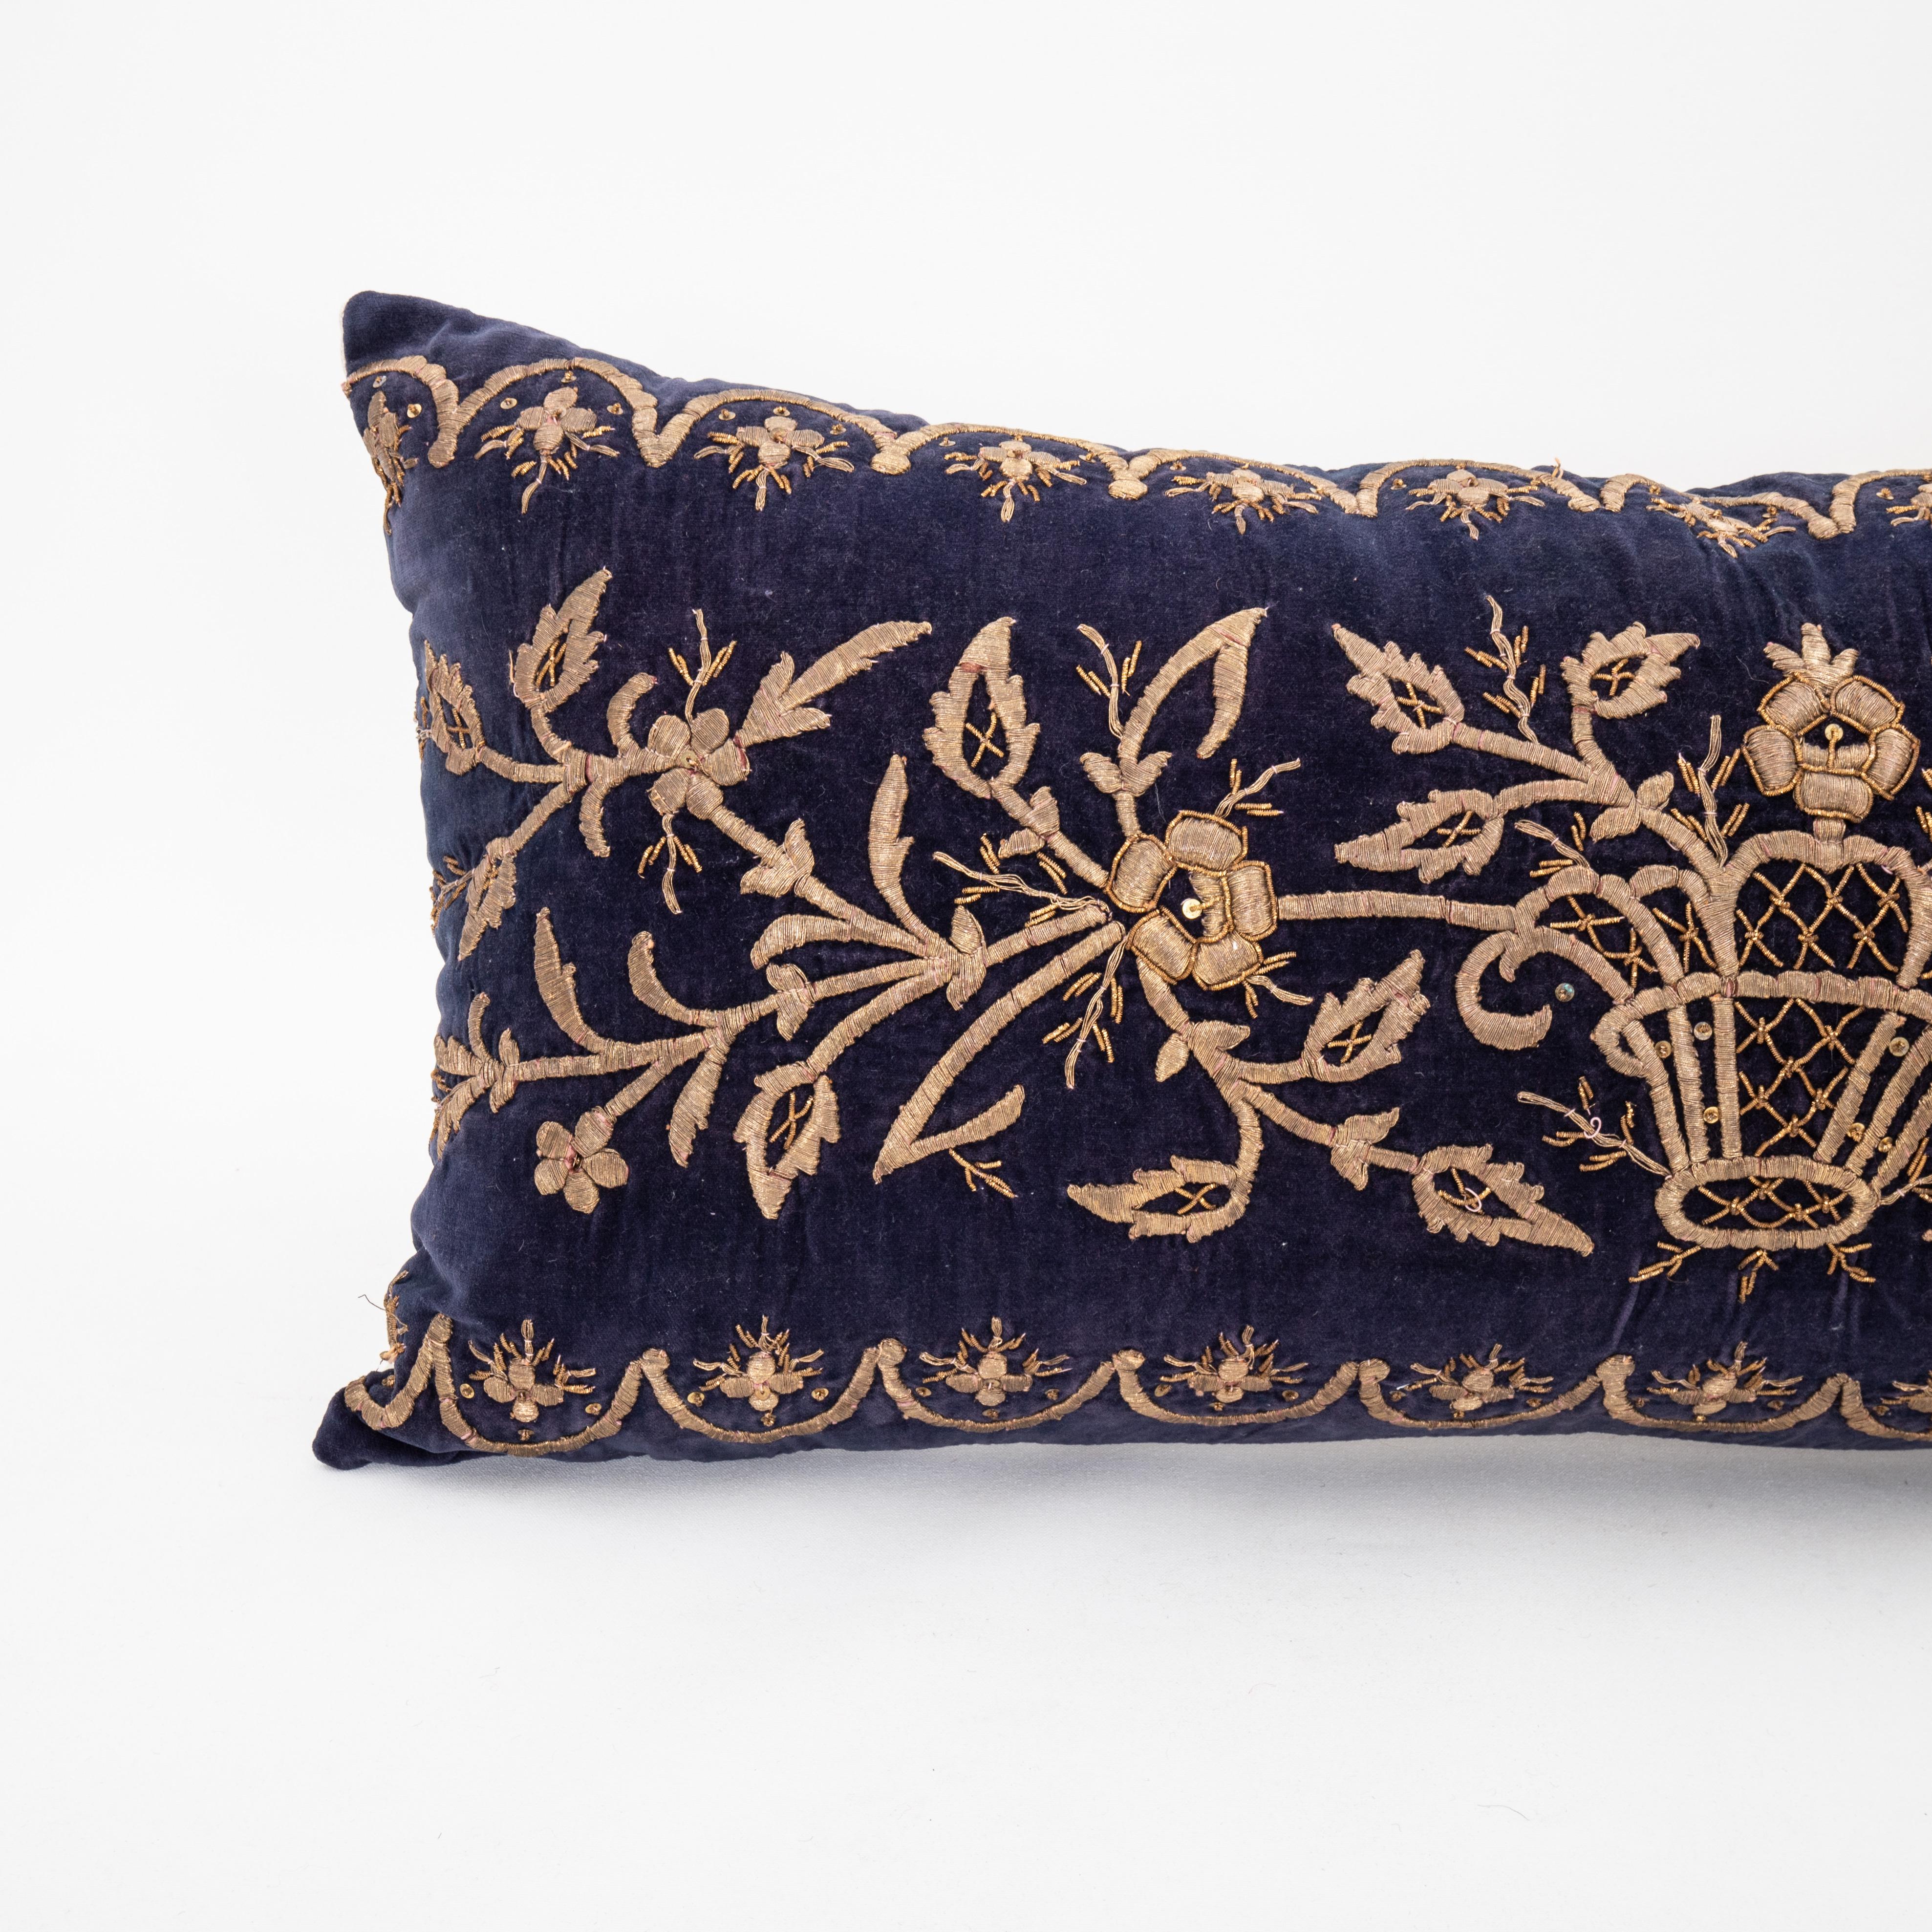 Embroidered Ottoman / Turkish Pillow Cover in Sarma Technique, late 19th / Early 20th C. For Sale